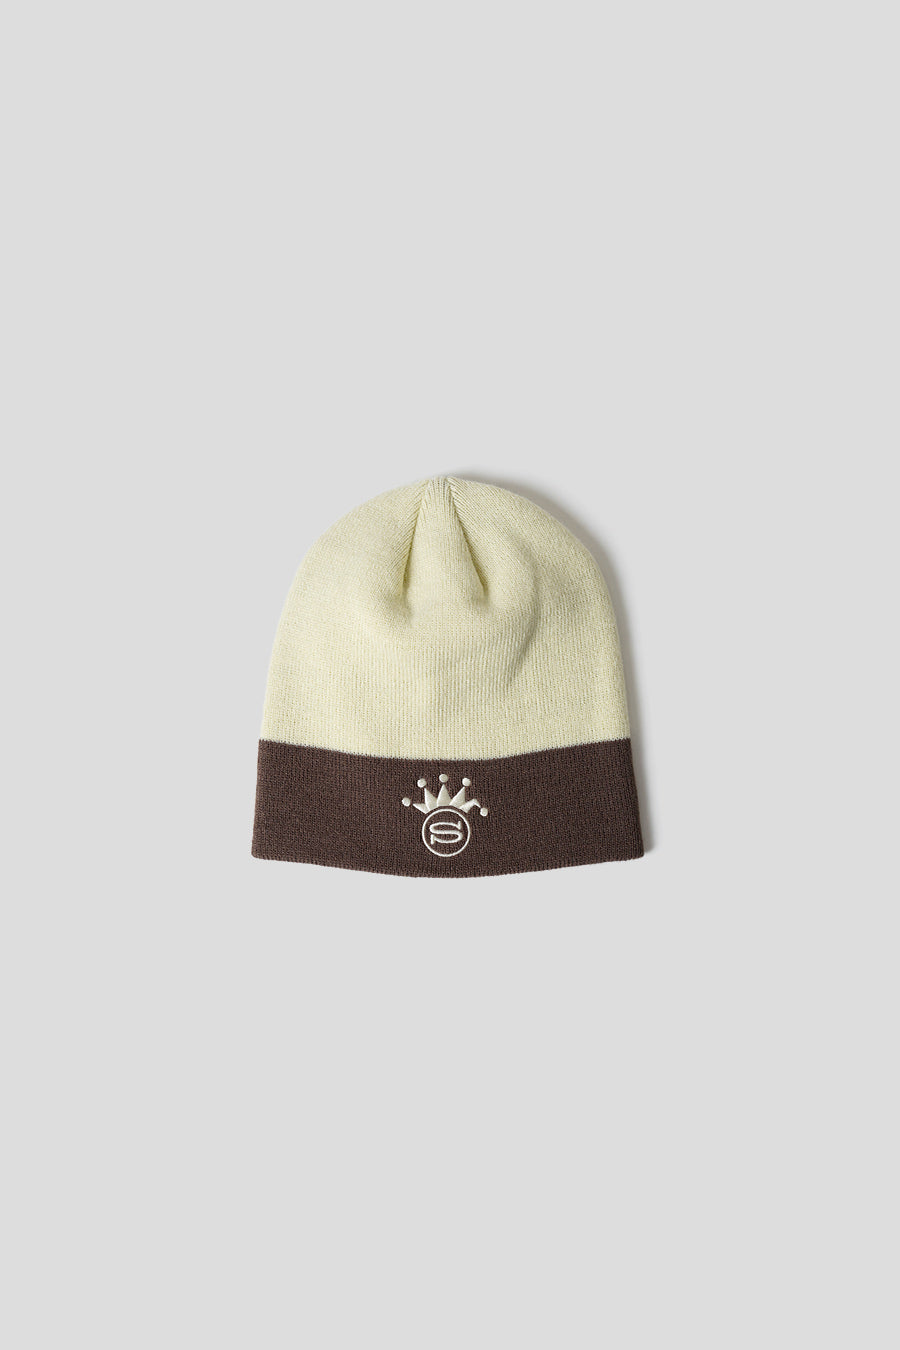 Stussy - BEIGE AND BROWN JACQUARD CROWN CAP - LE LABO STORE